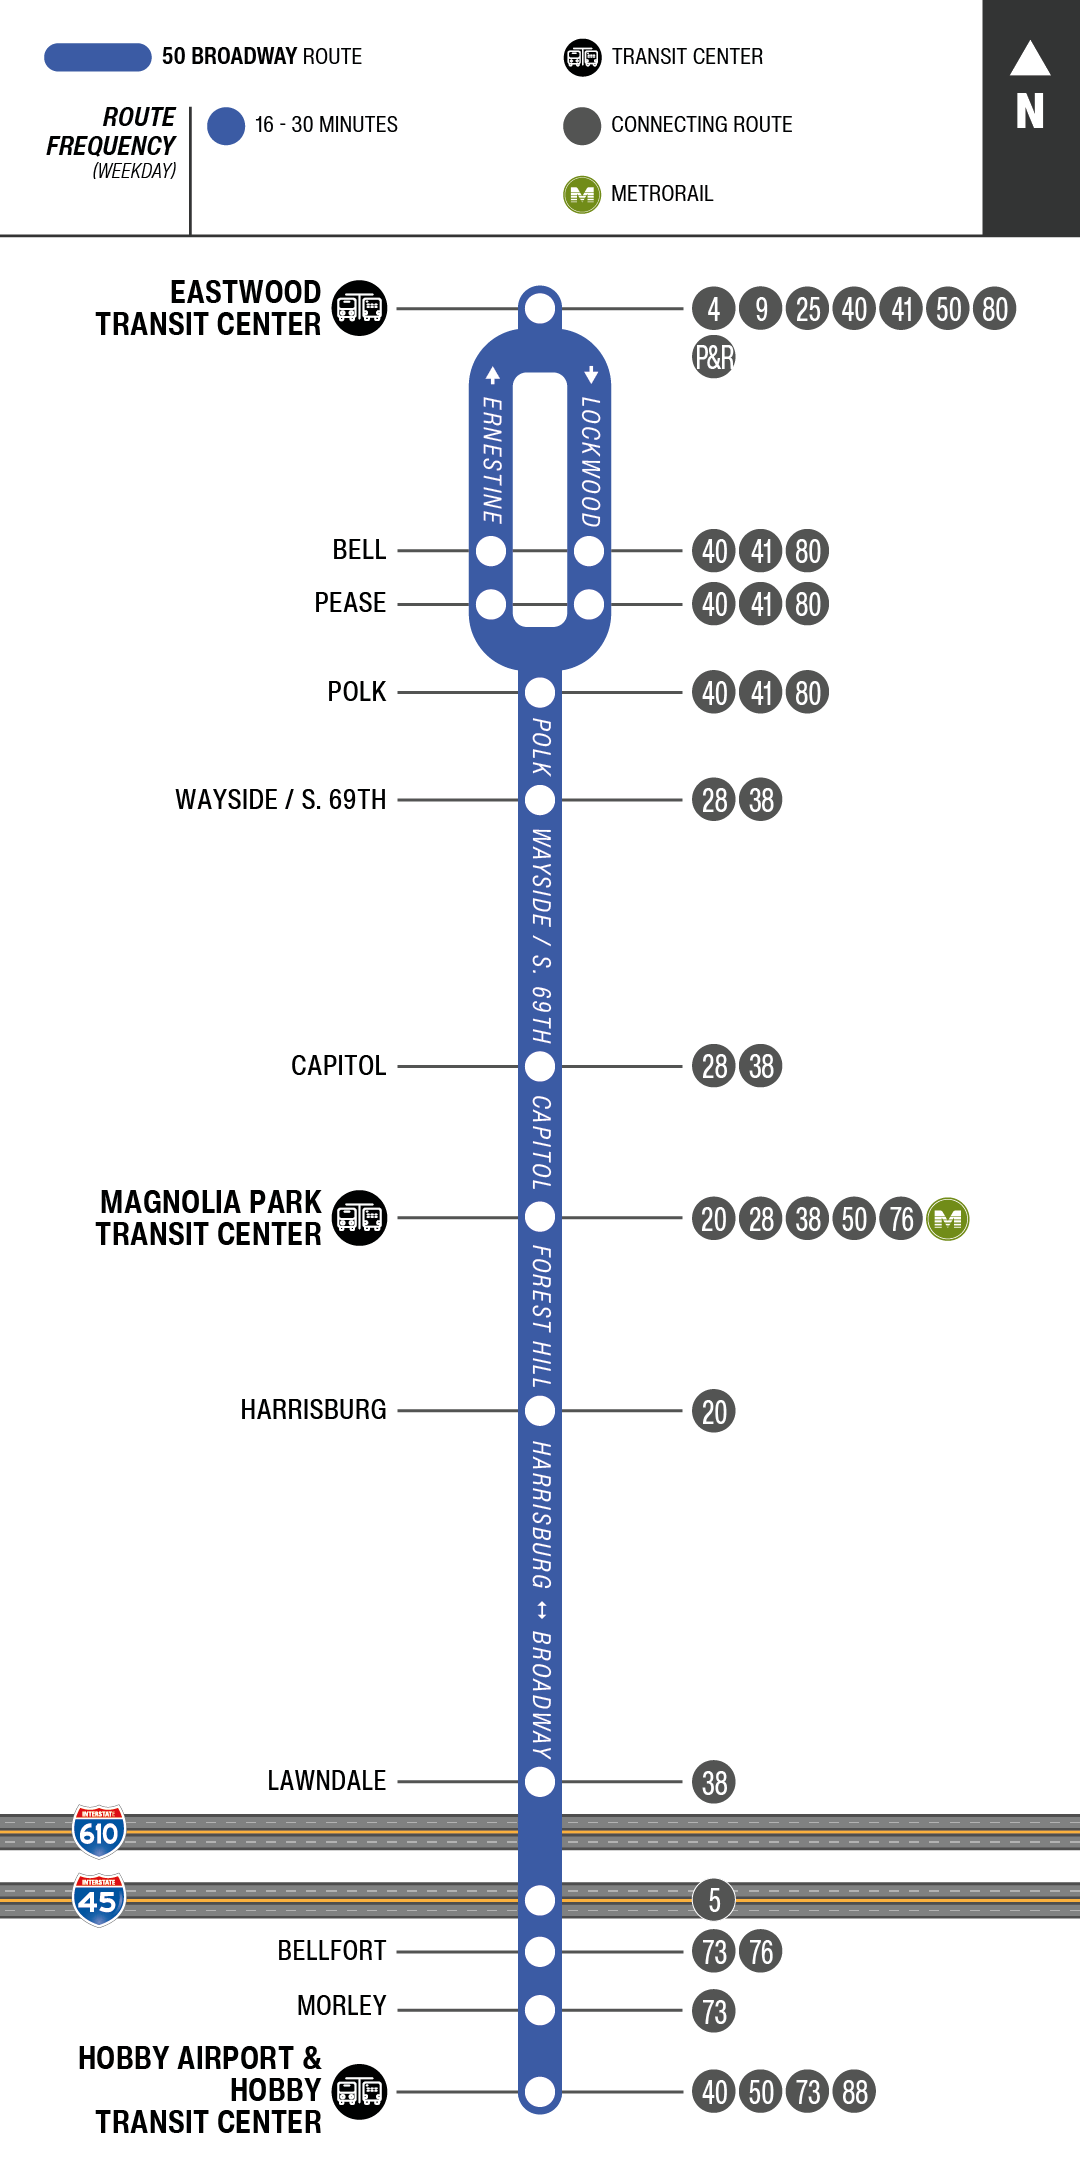 Route map for 50 Broadway bus